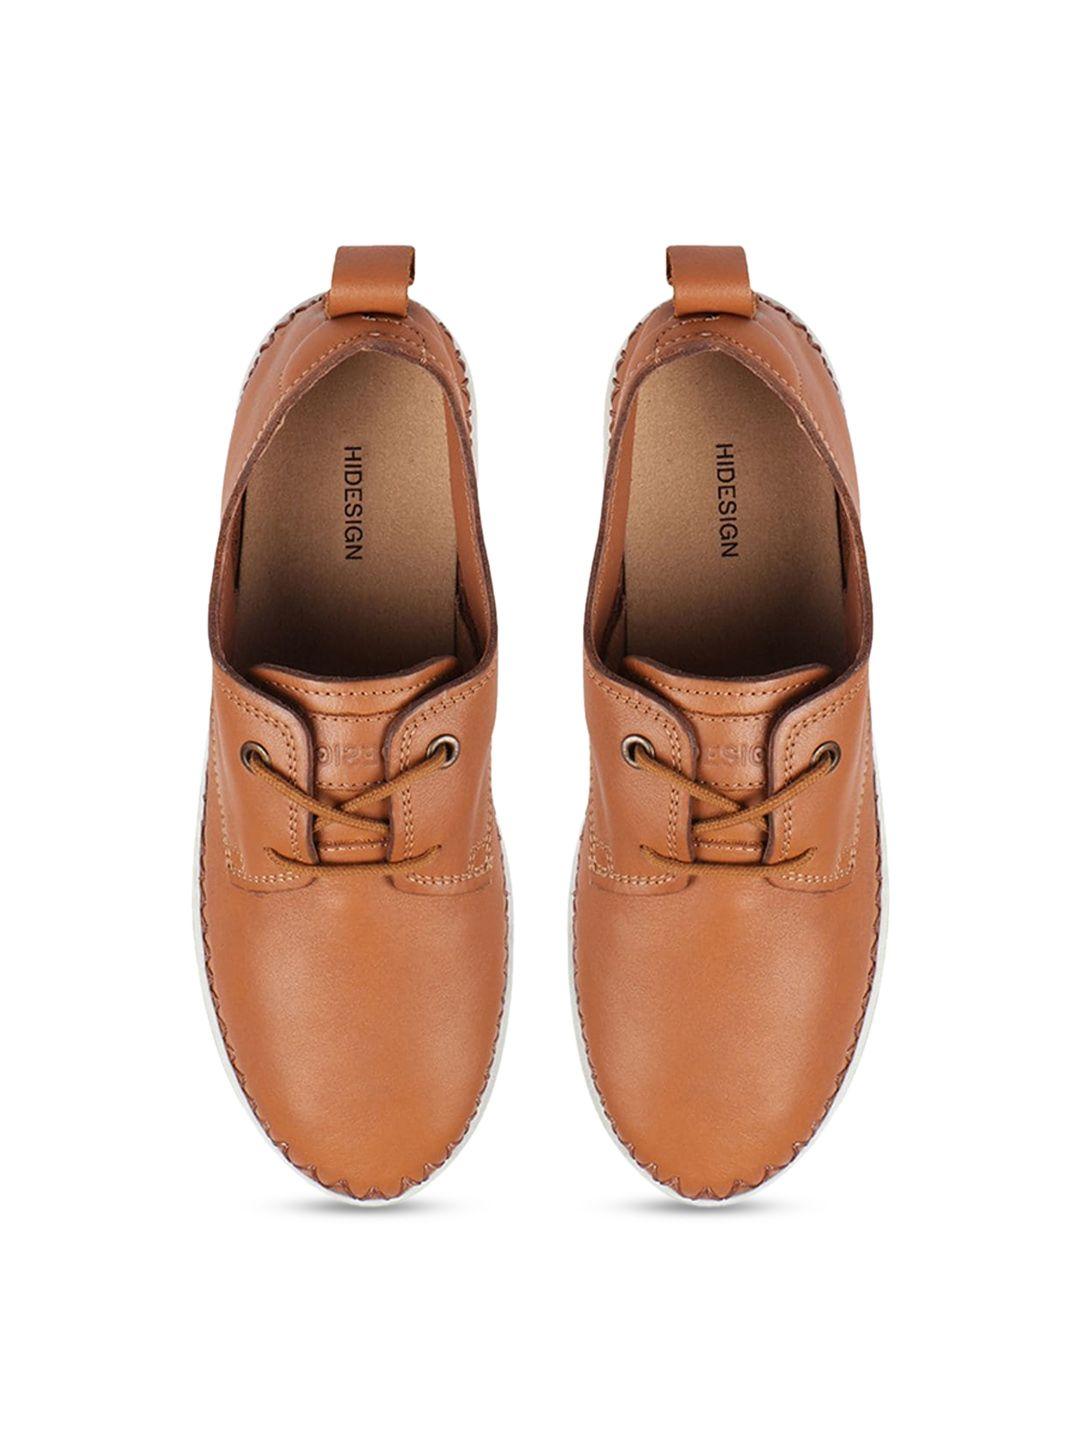 hidesign women andes leather derbys